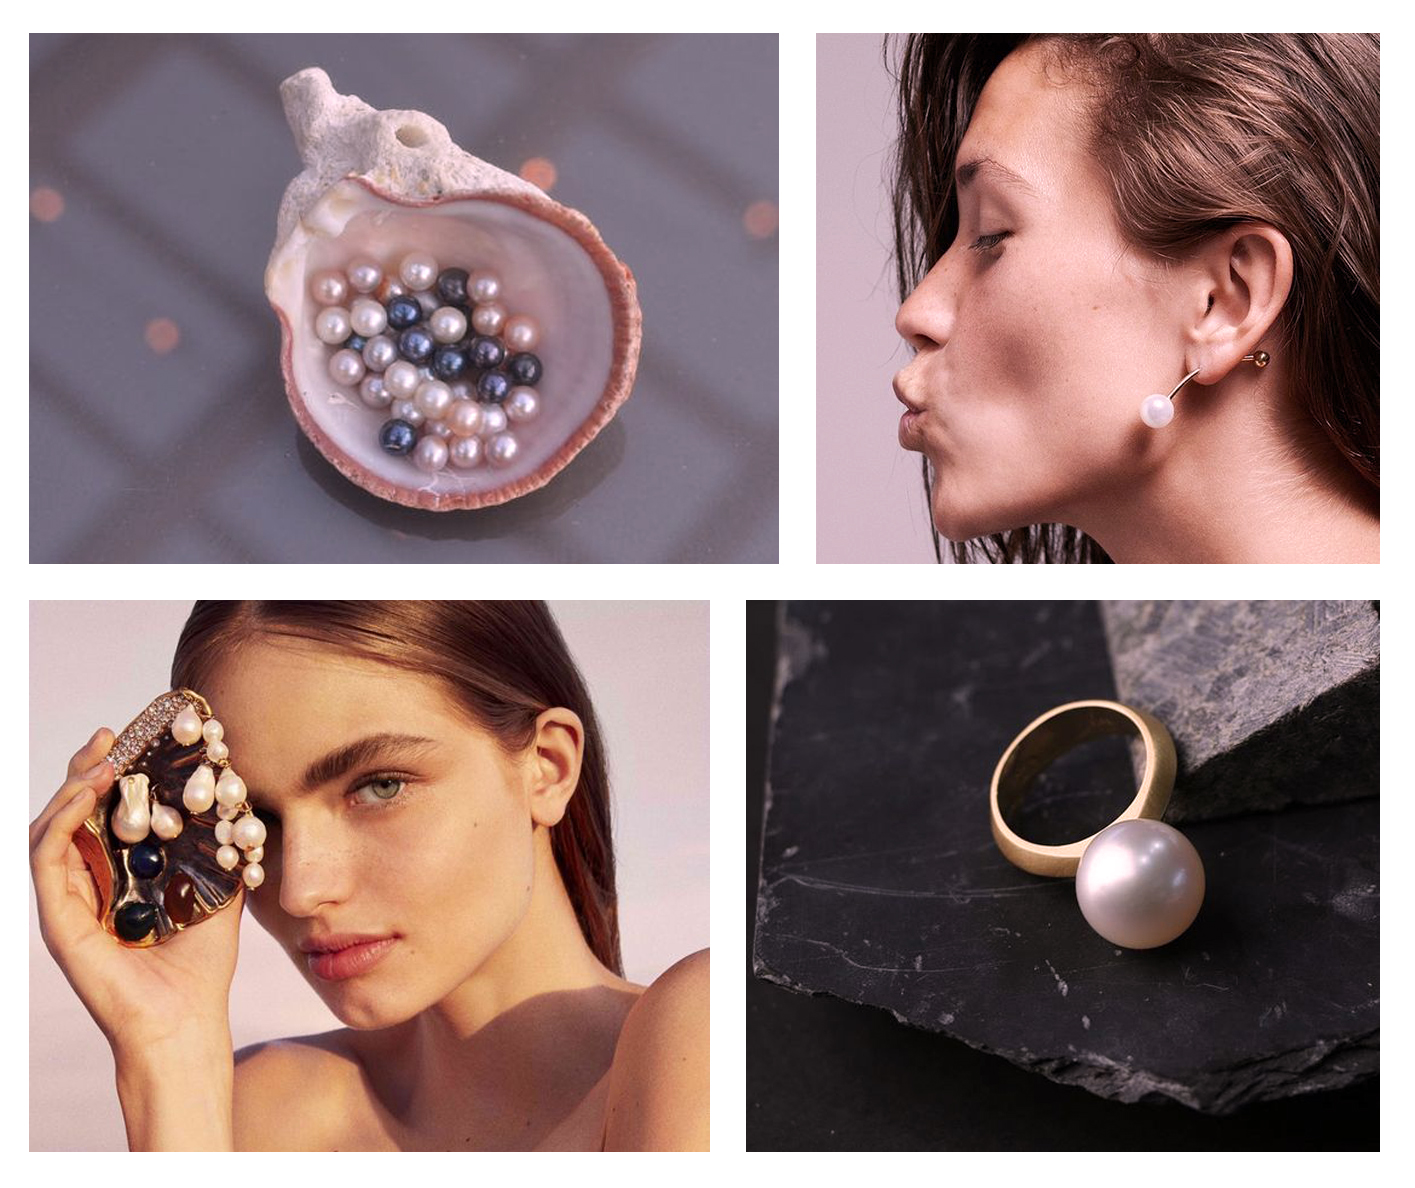 How to Tell if Pearls Are Real or Fake: The Foolproof Guide - Laguna Pearl